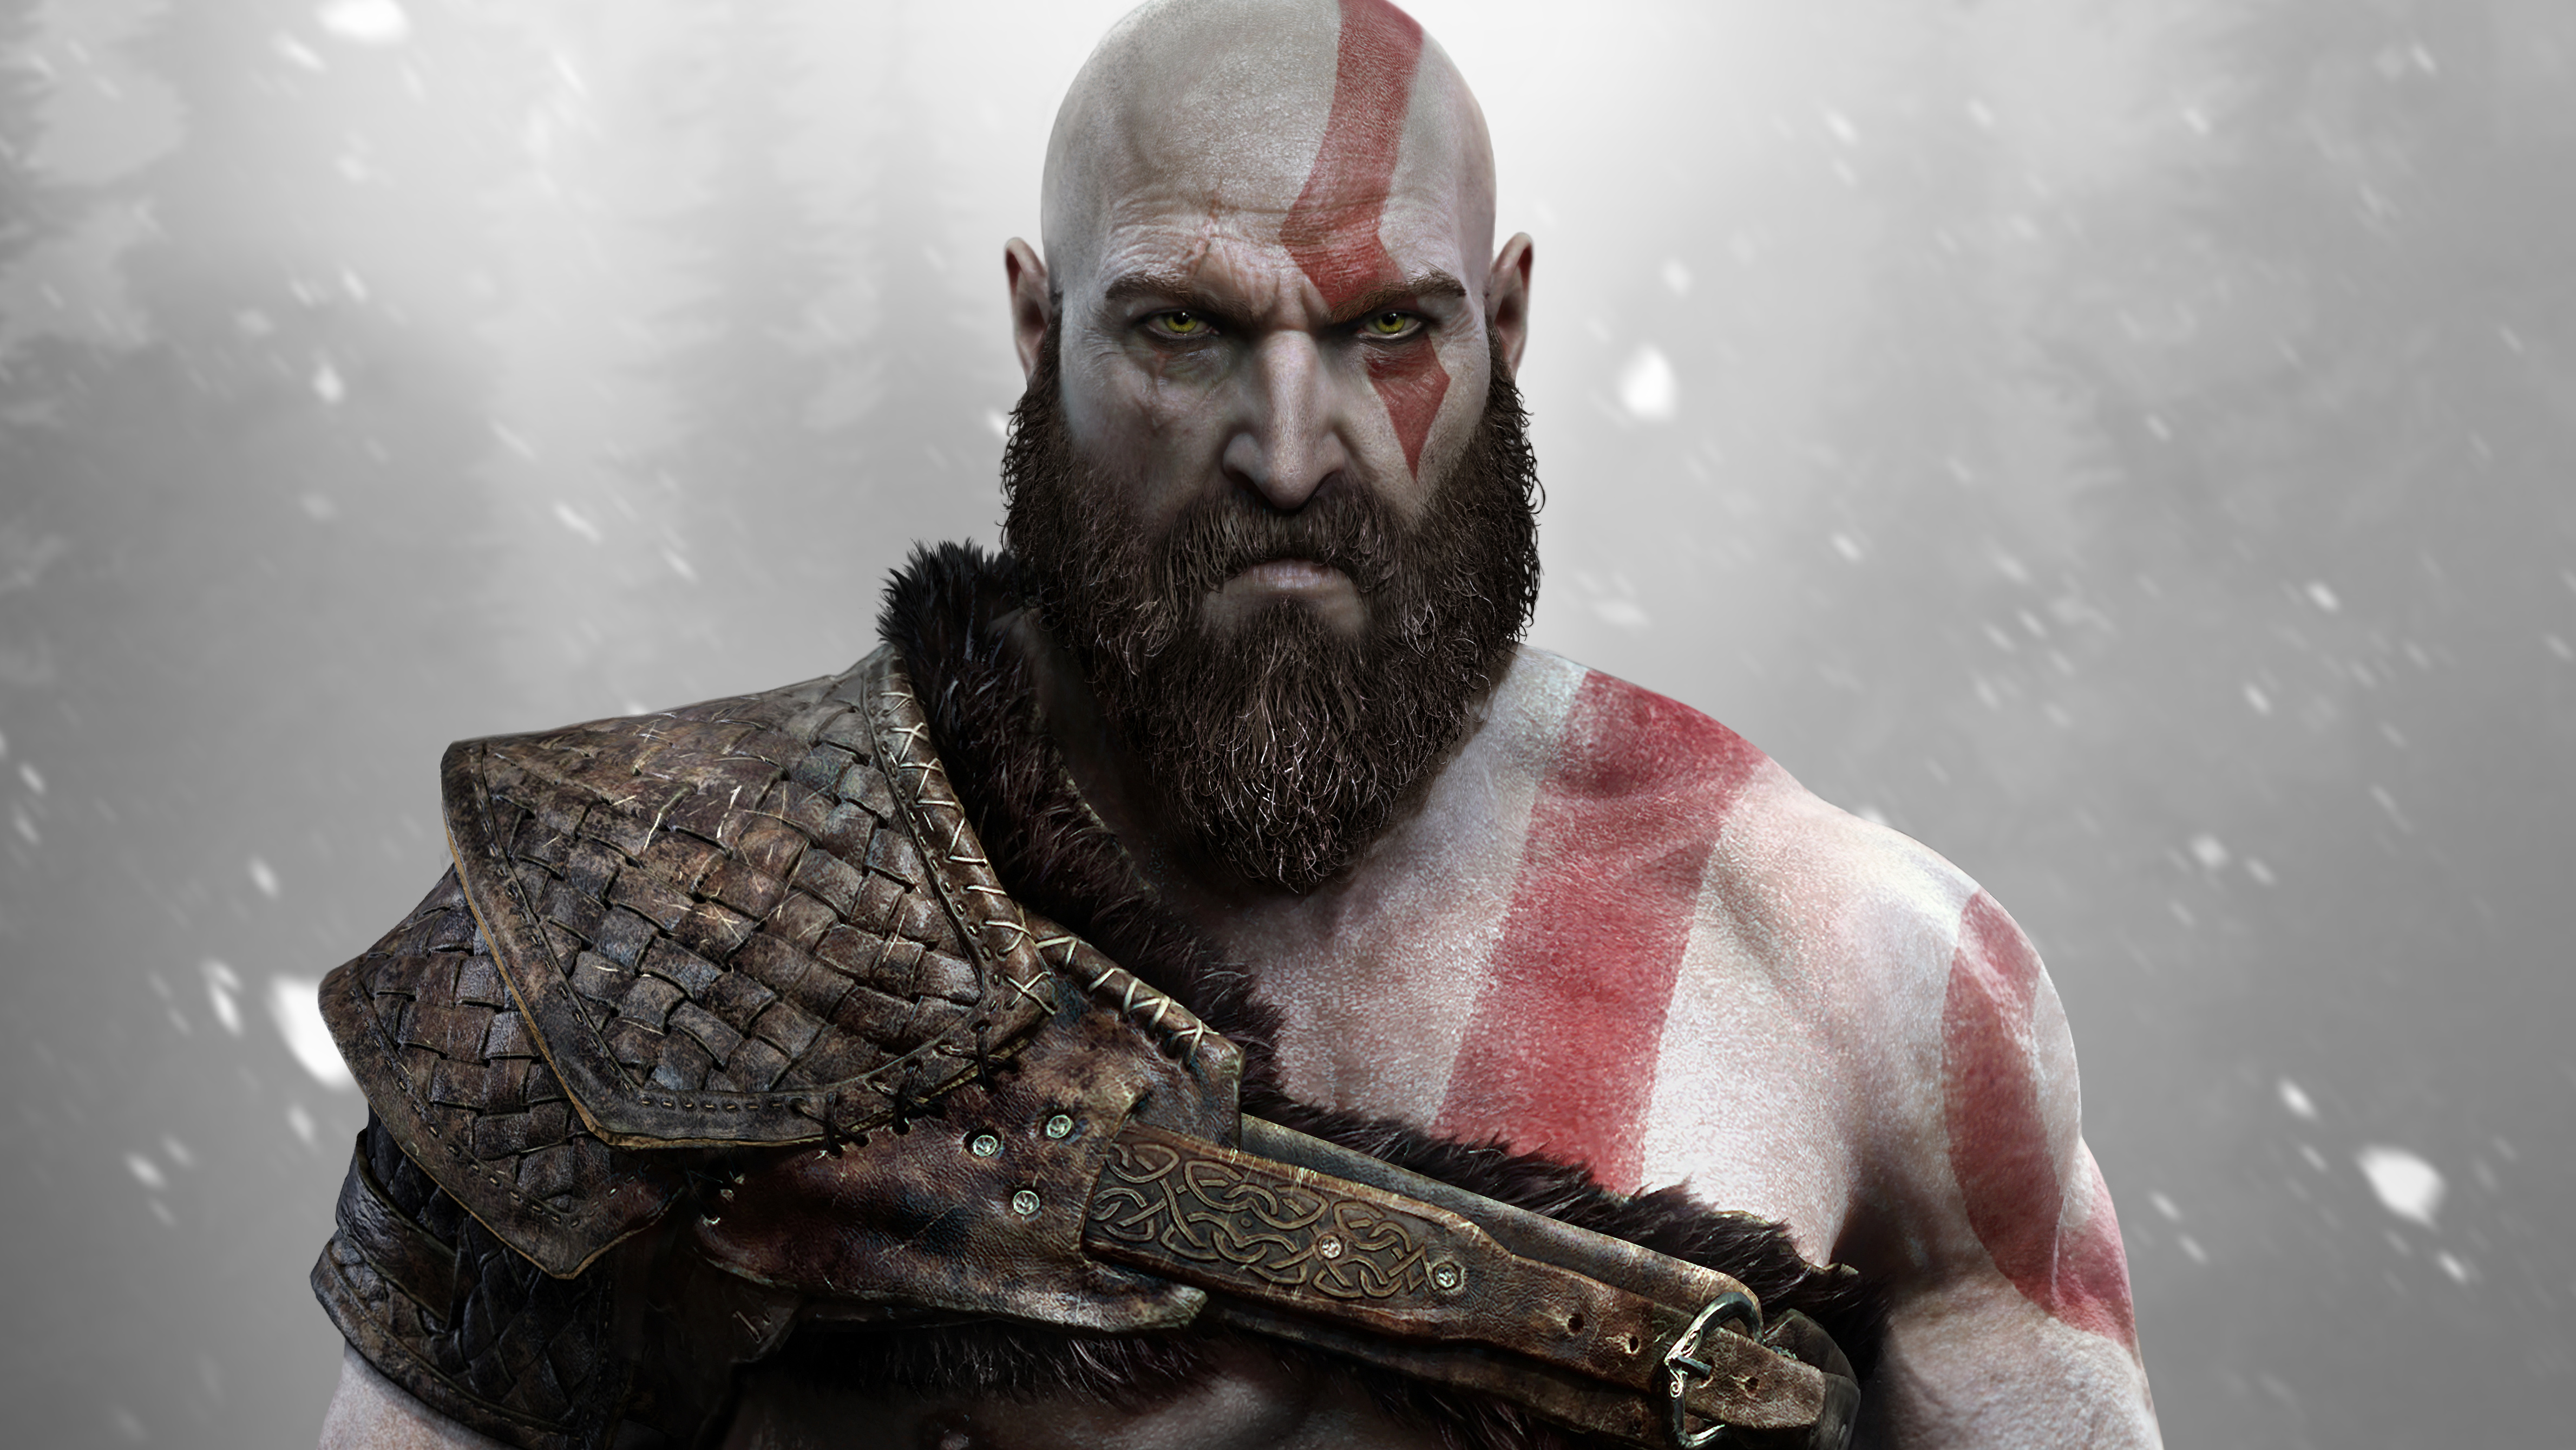 New God of War: Ghost of Sparta Skins Exposed, Deimos for God of